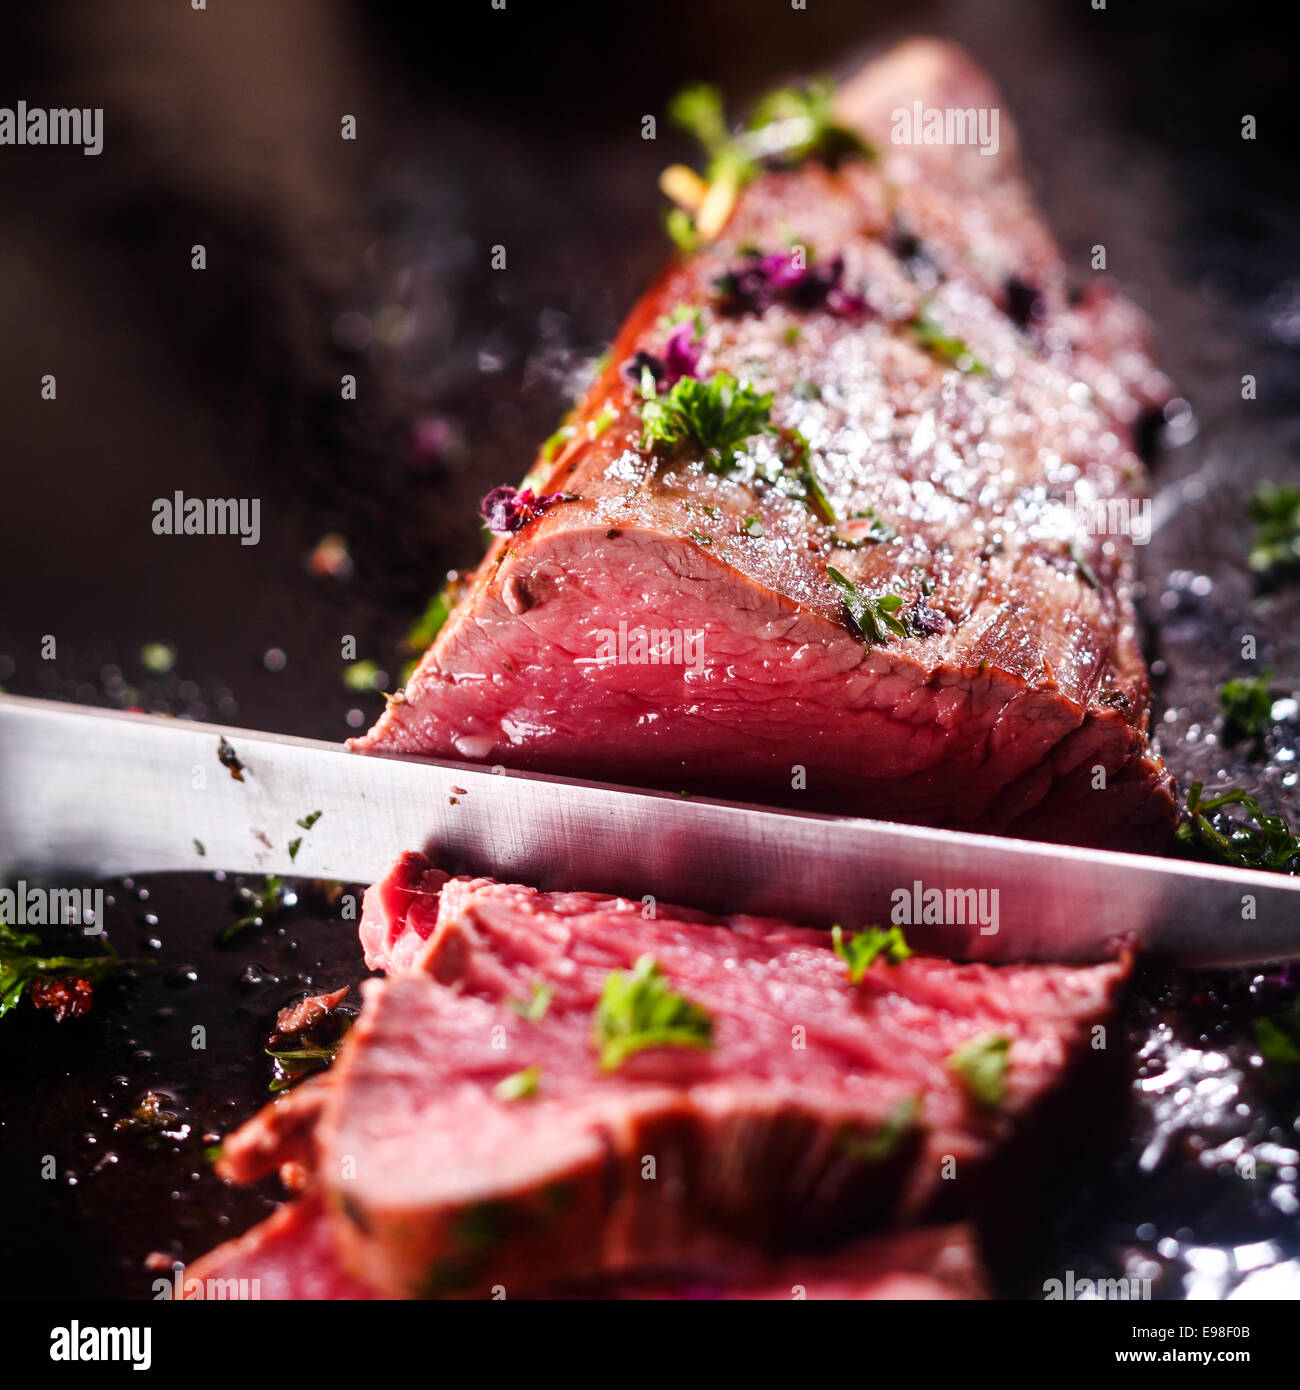 Carving a portion of delicious rare roast beef sirloin of fillet seasoned with fresh herbs with a large steel carving knife Stock Photo